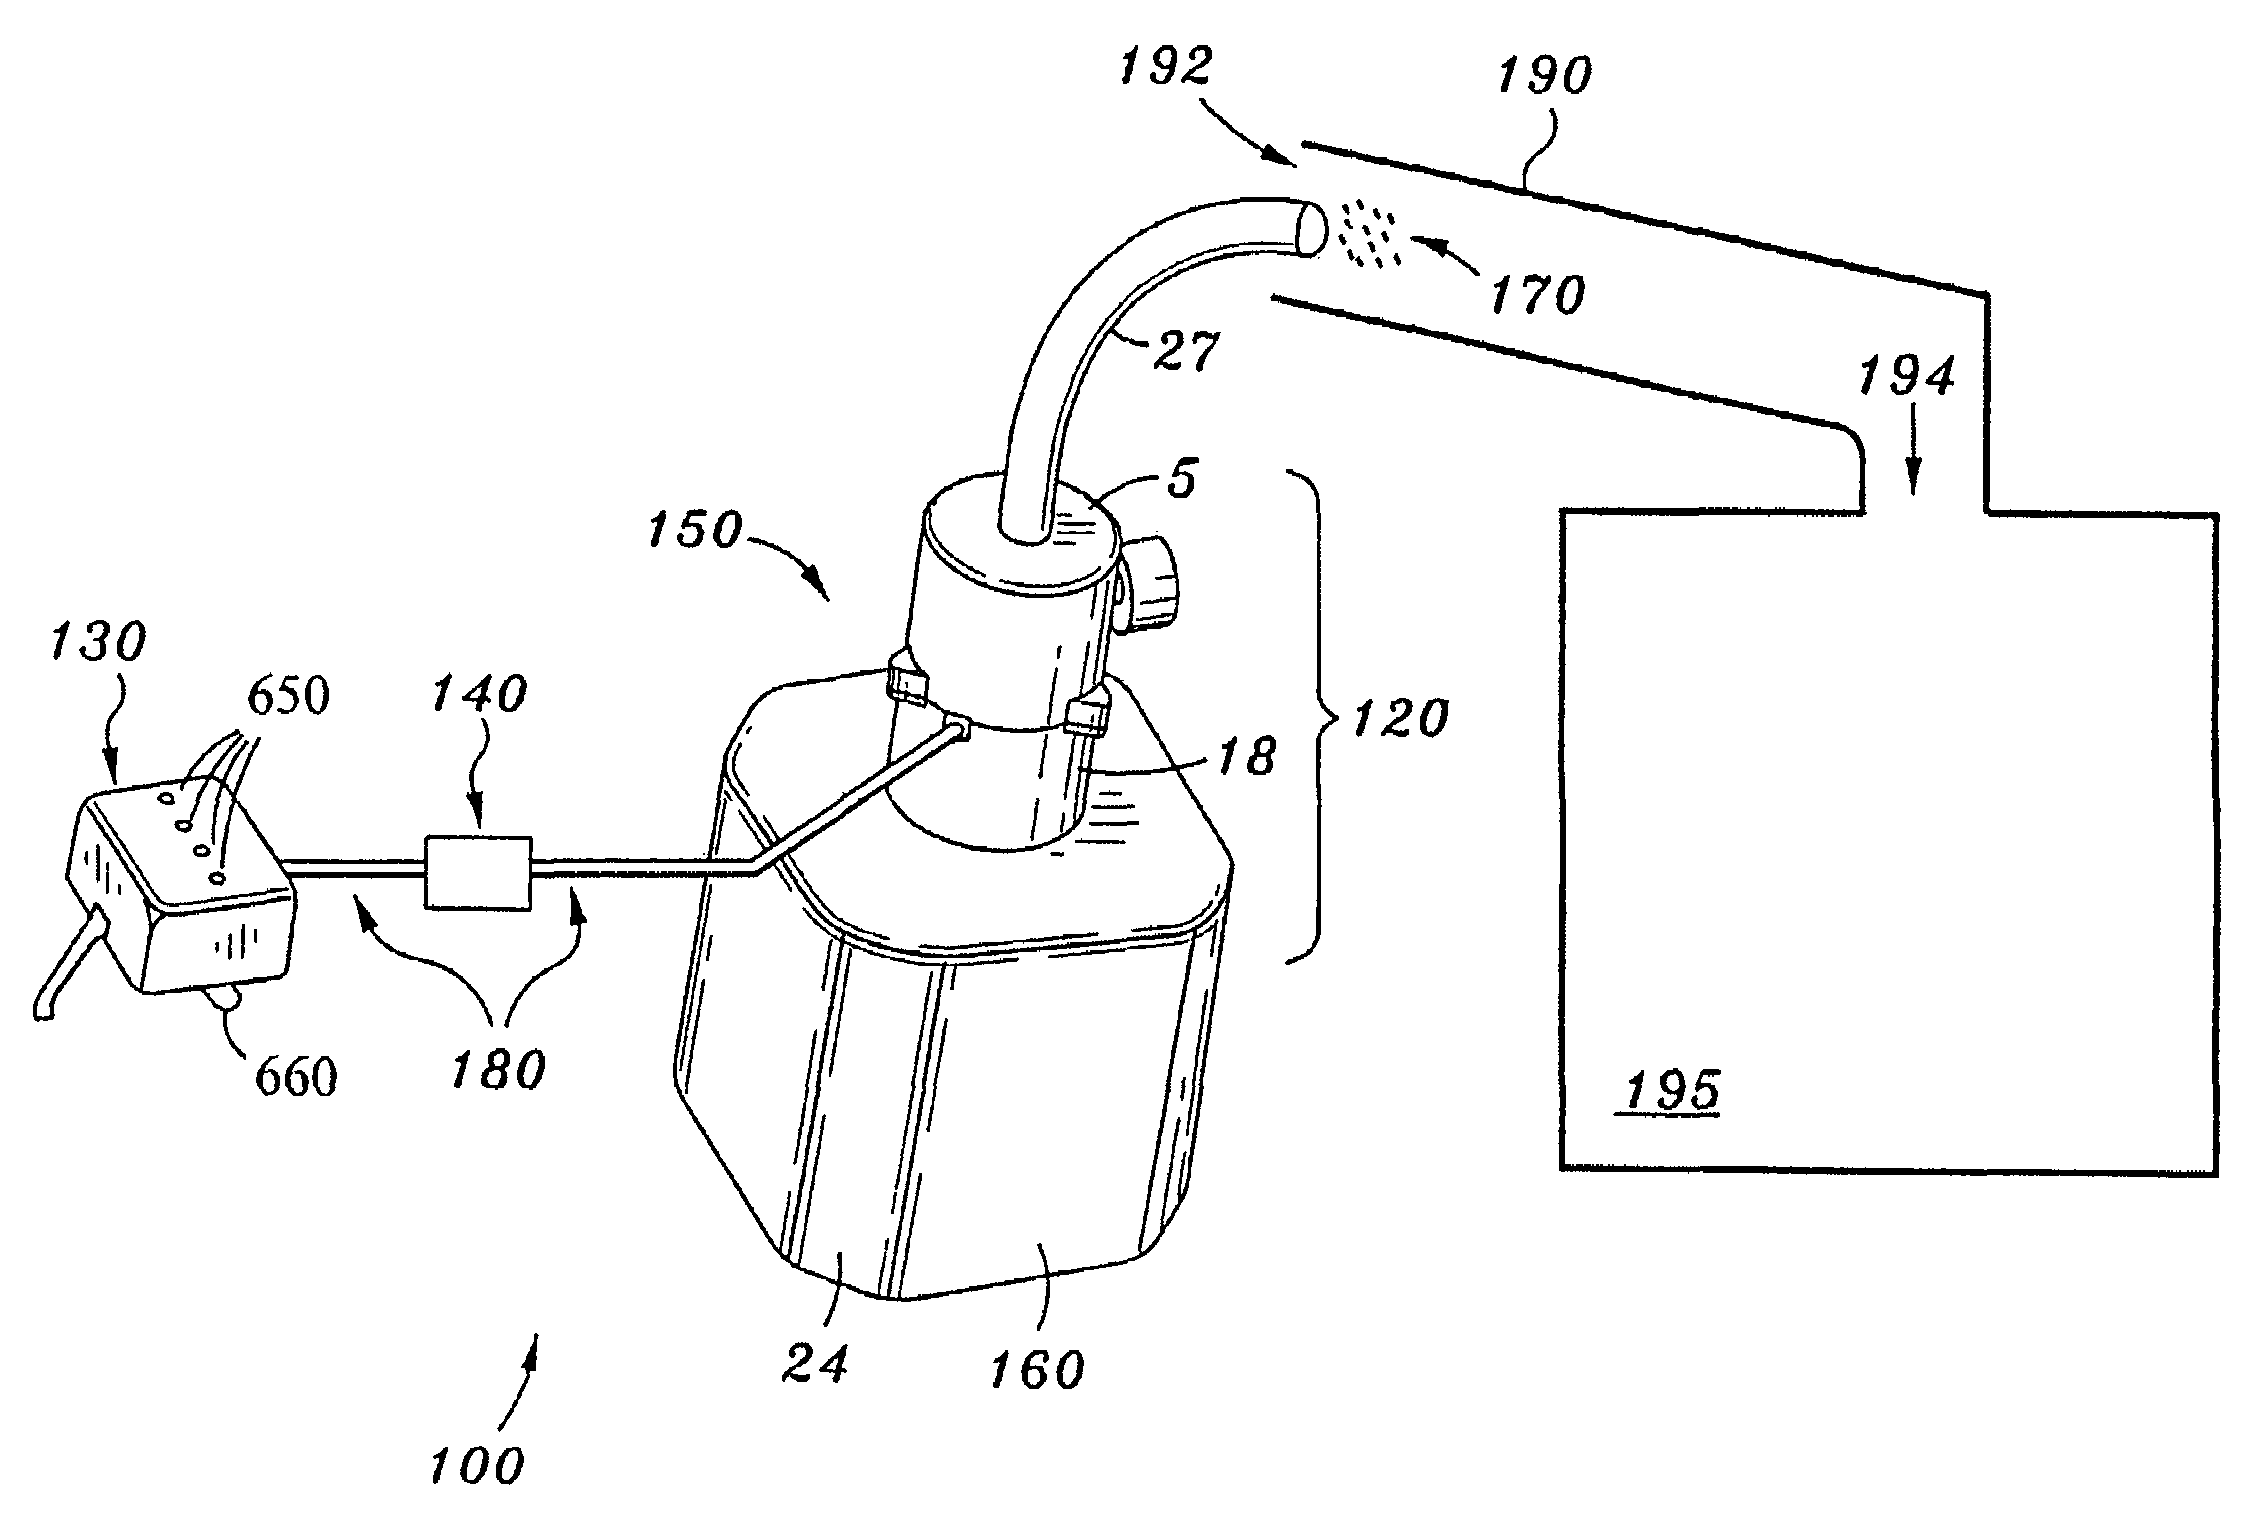 Fuel combustion catalyst microburst aerosol delivery device and continuous and consistent aerosol delivery device